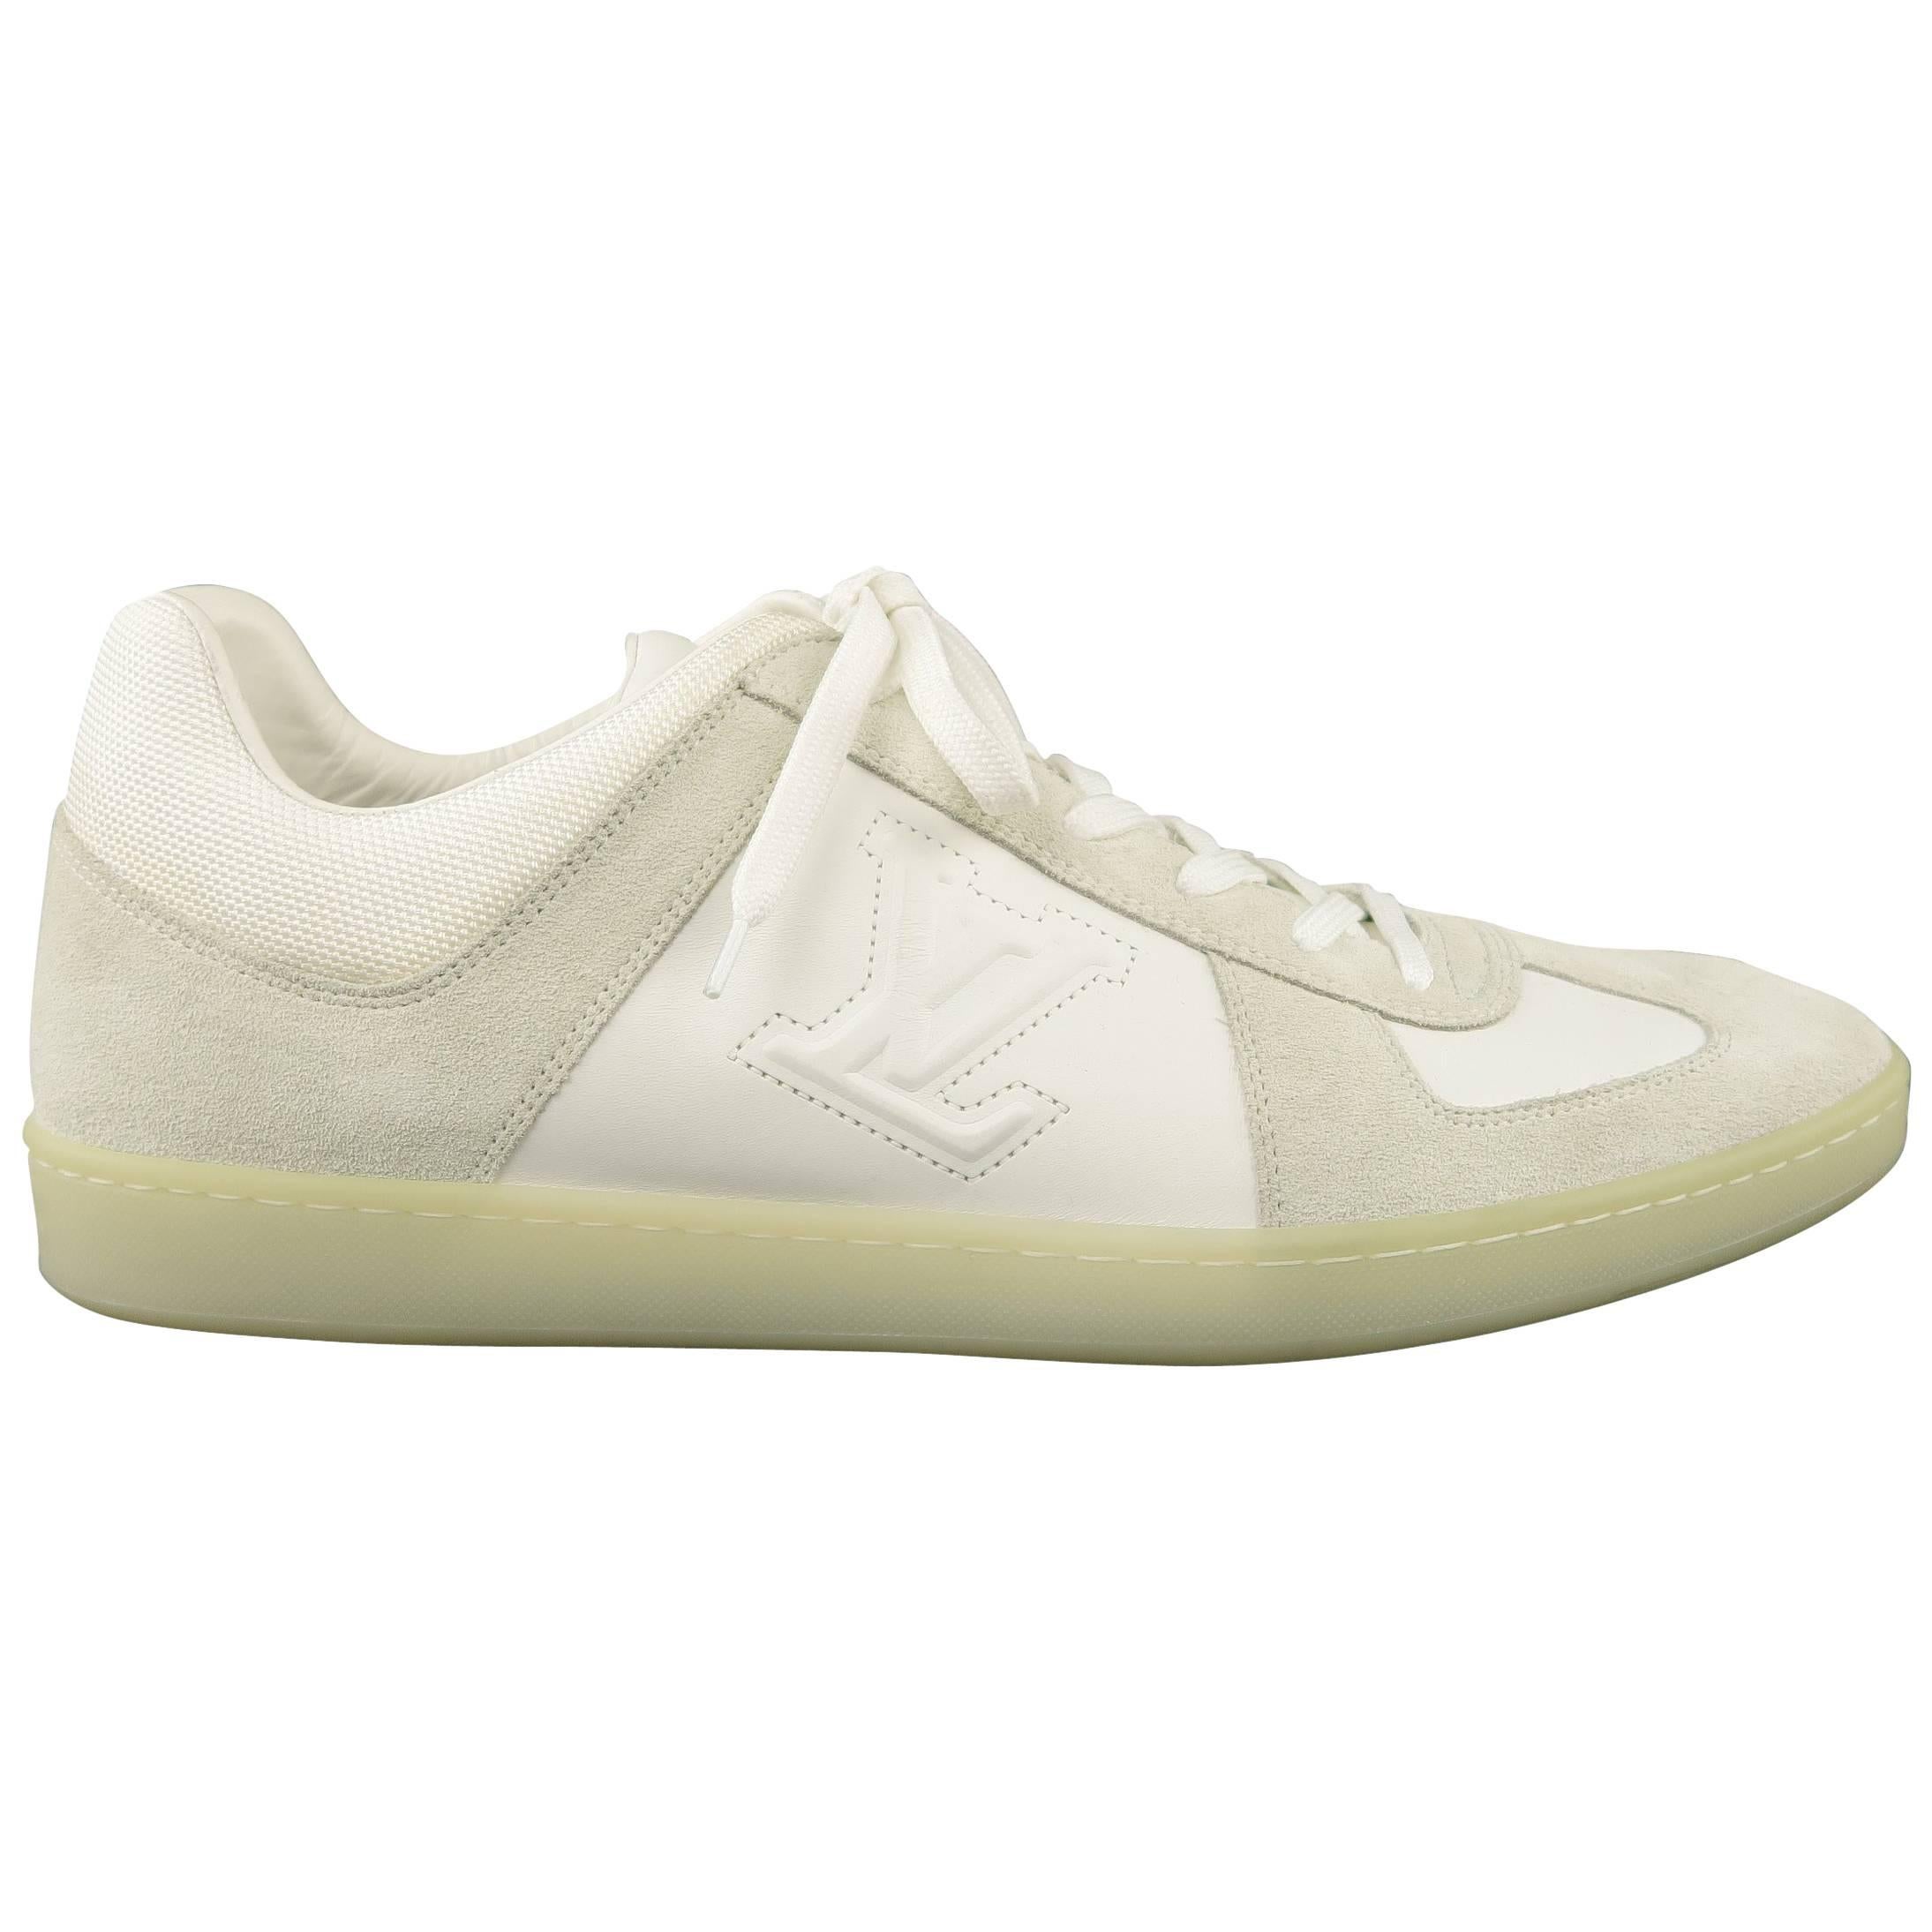 Louis Vuitton White and Gray Leather Trainer Sneakers 